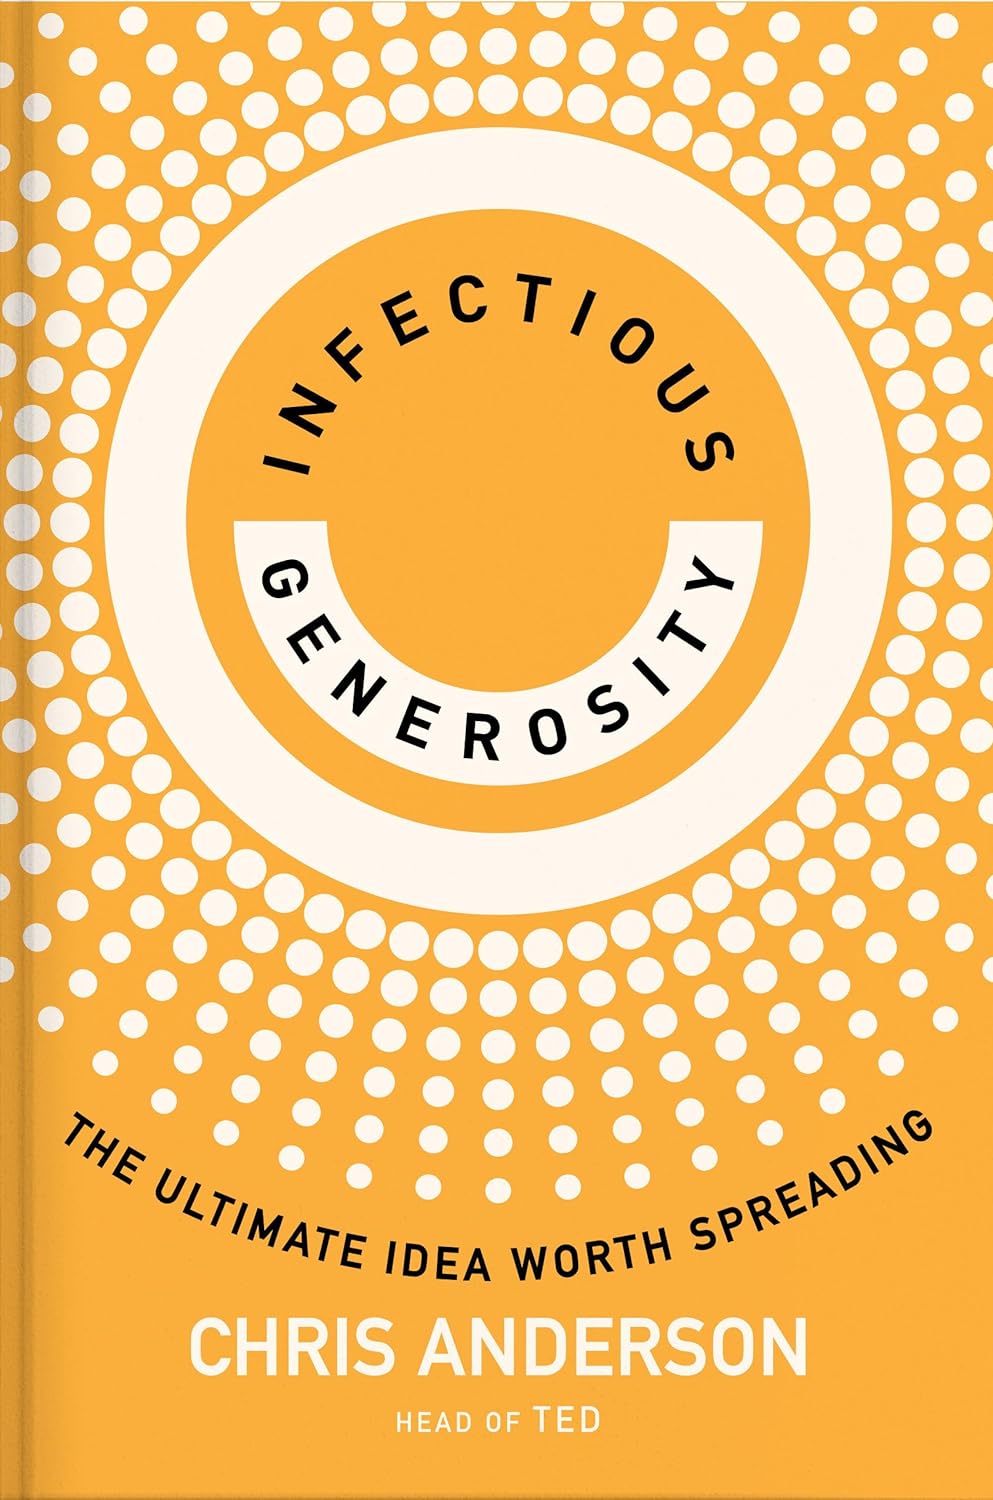 INFECTIOUS GENEROSITY: THE ULTIMATE IDEA WORTH SPREADING